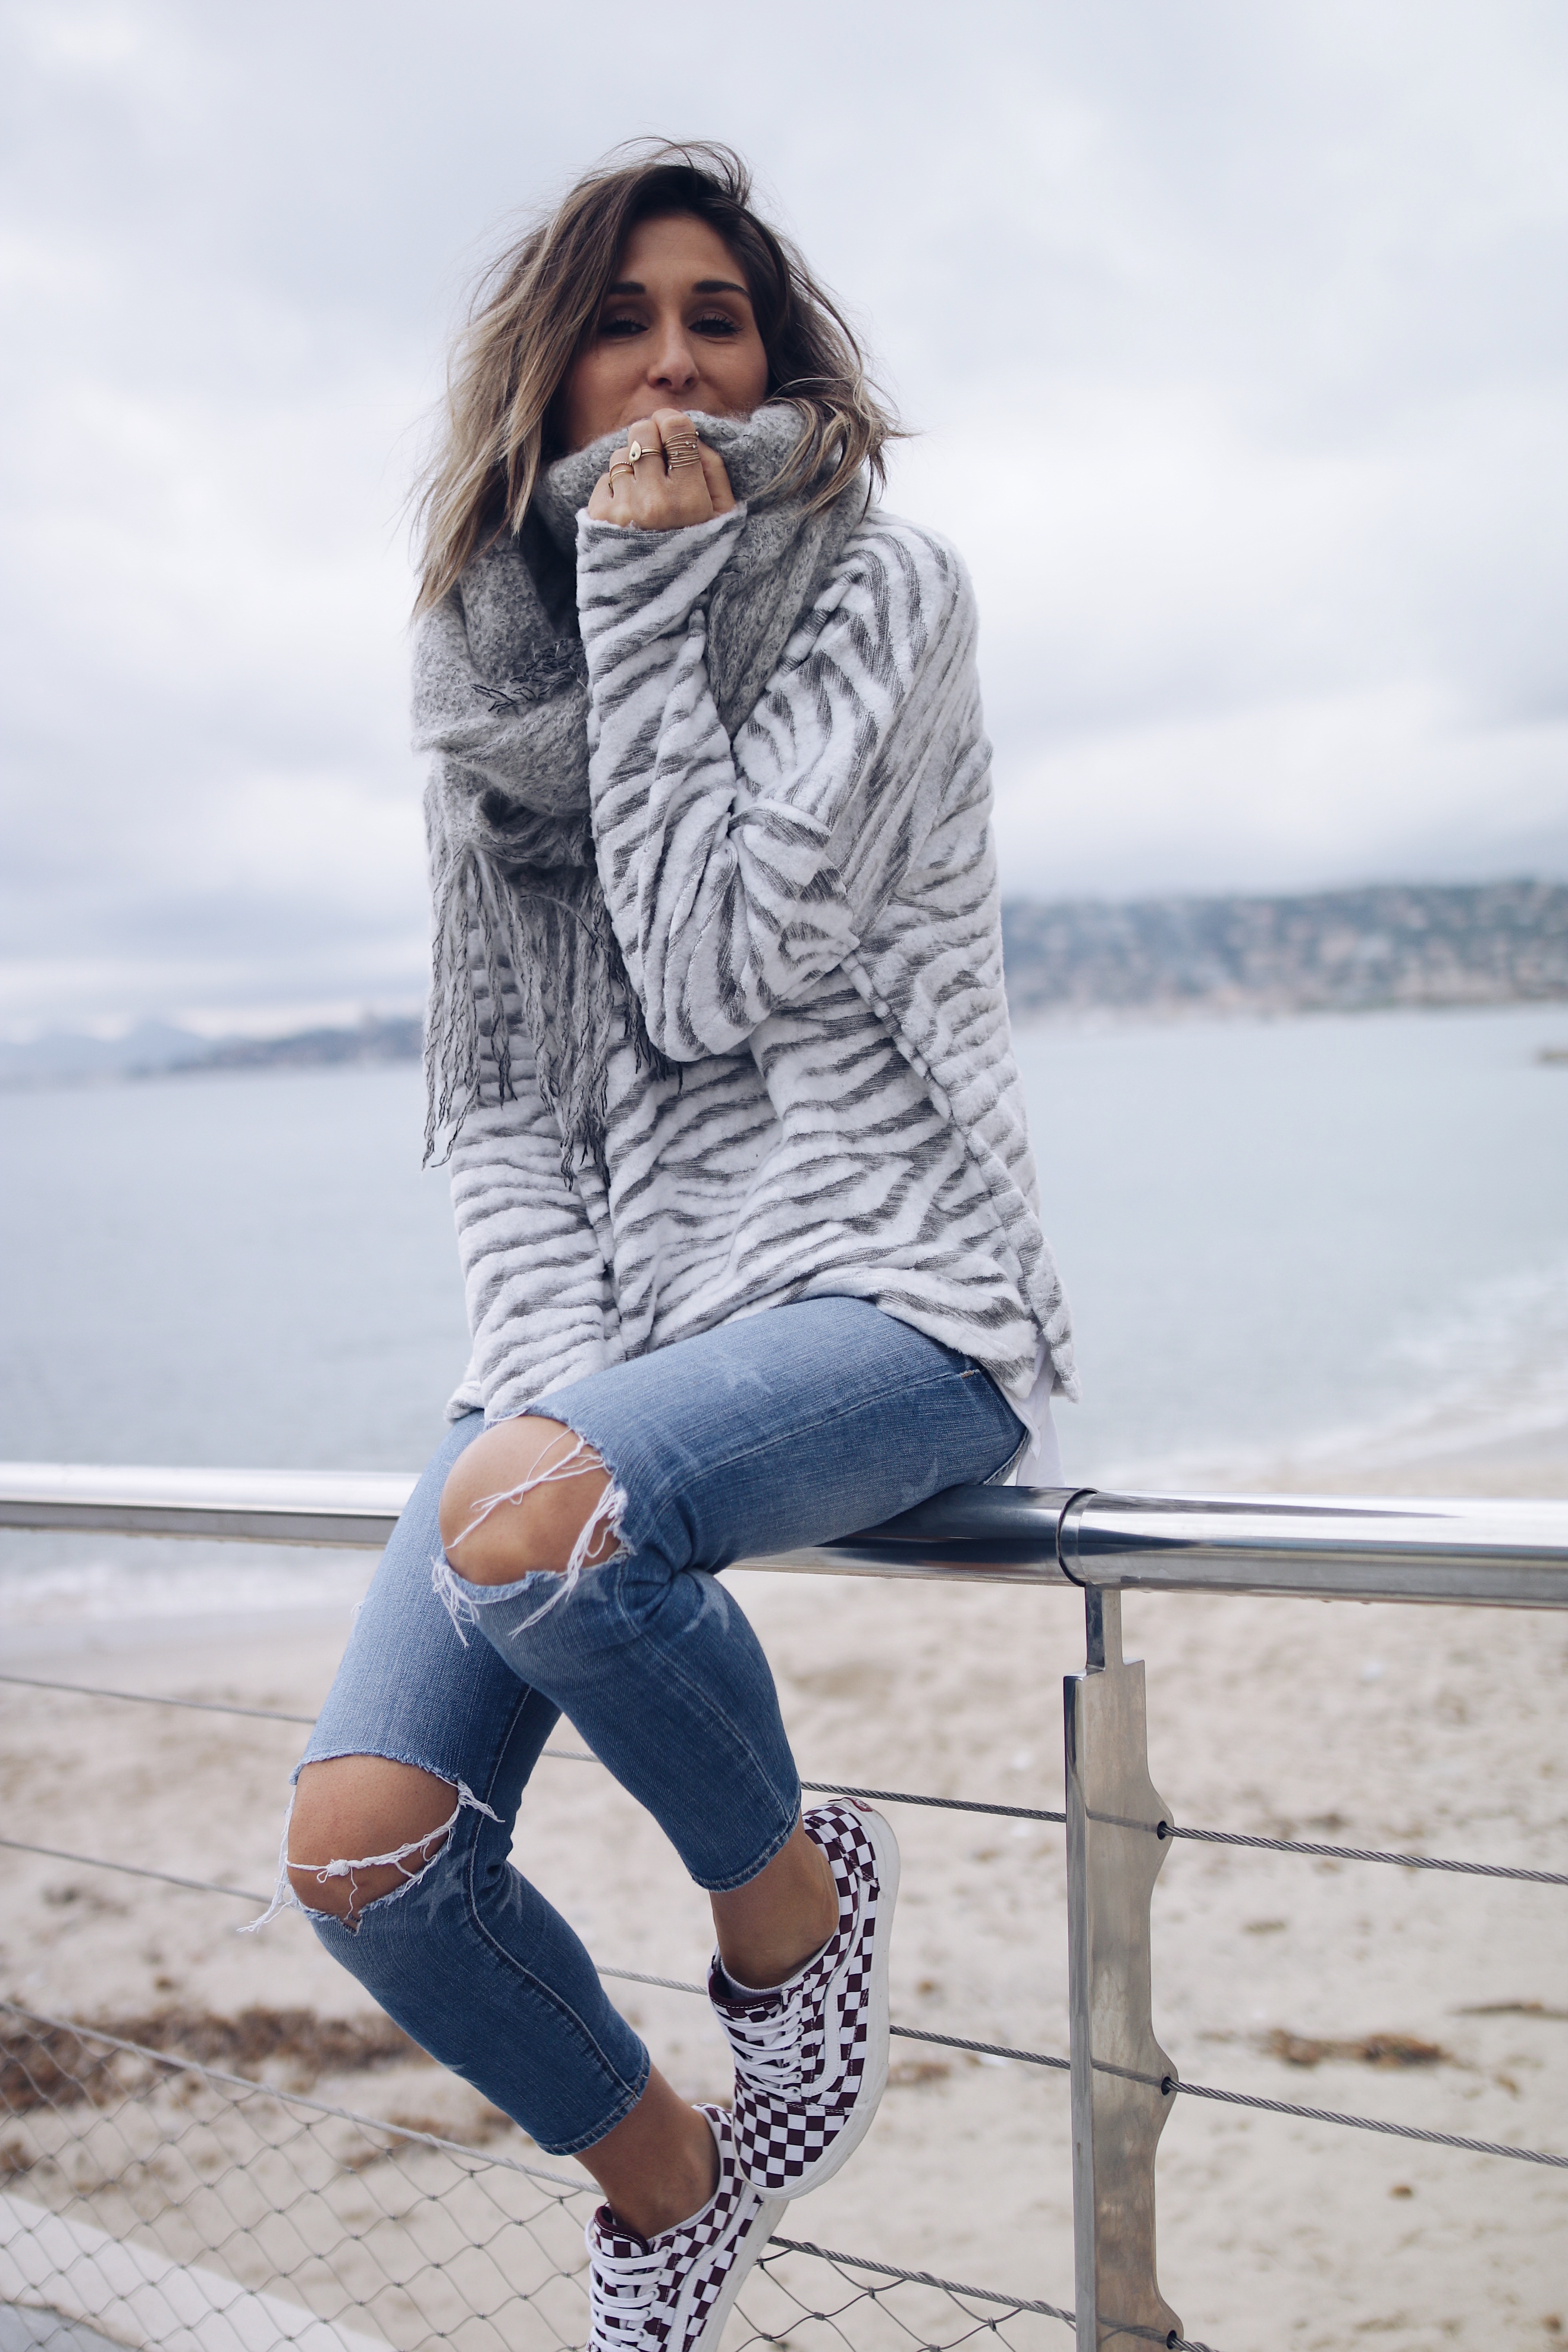 Casual style, denim style, knit lover, knit outfit, knit and denim outfit